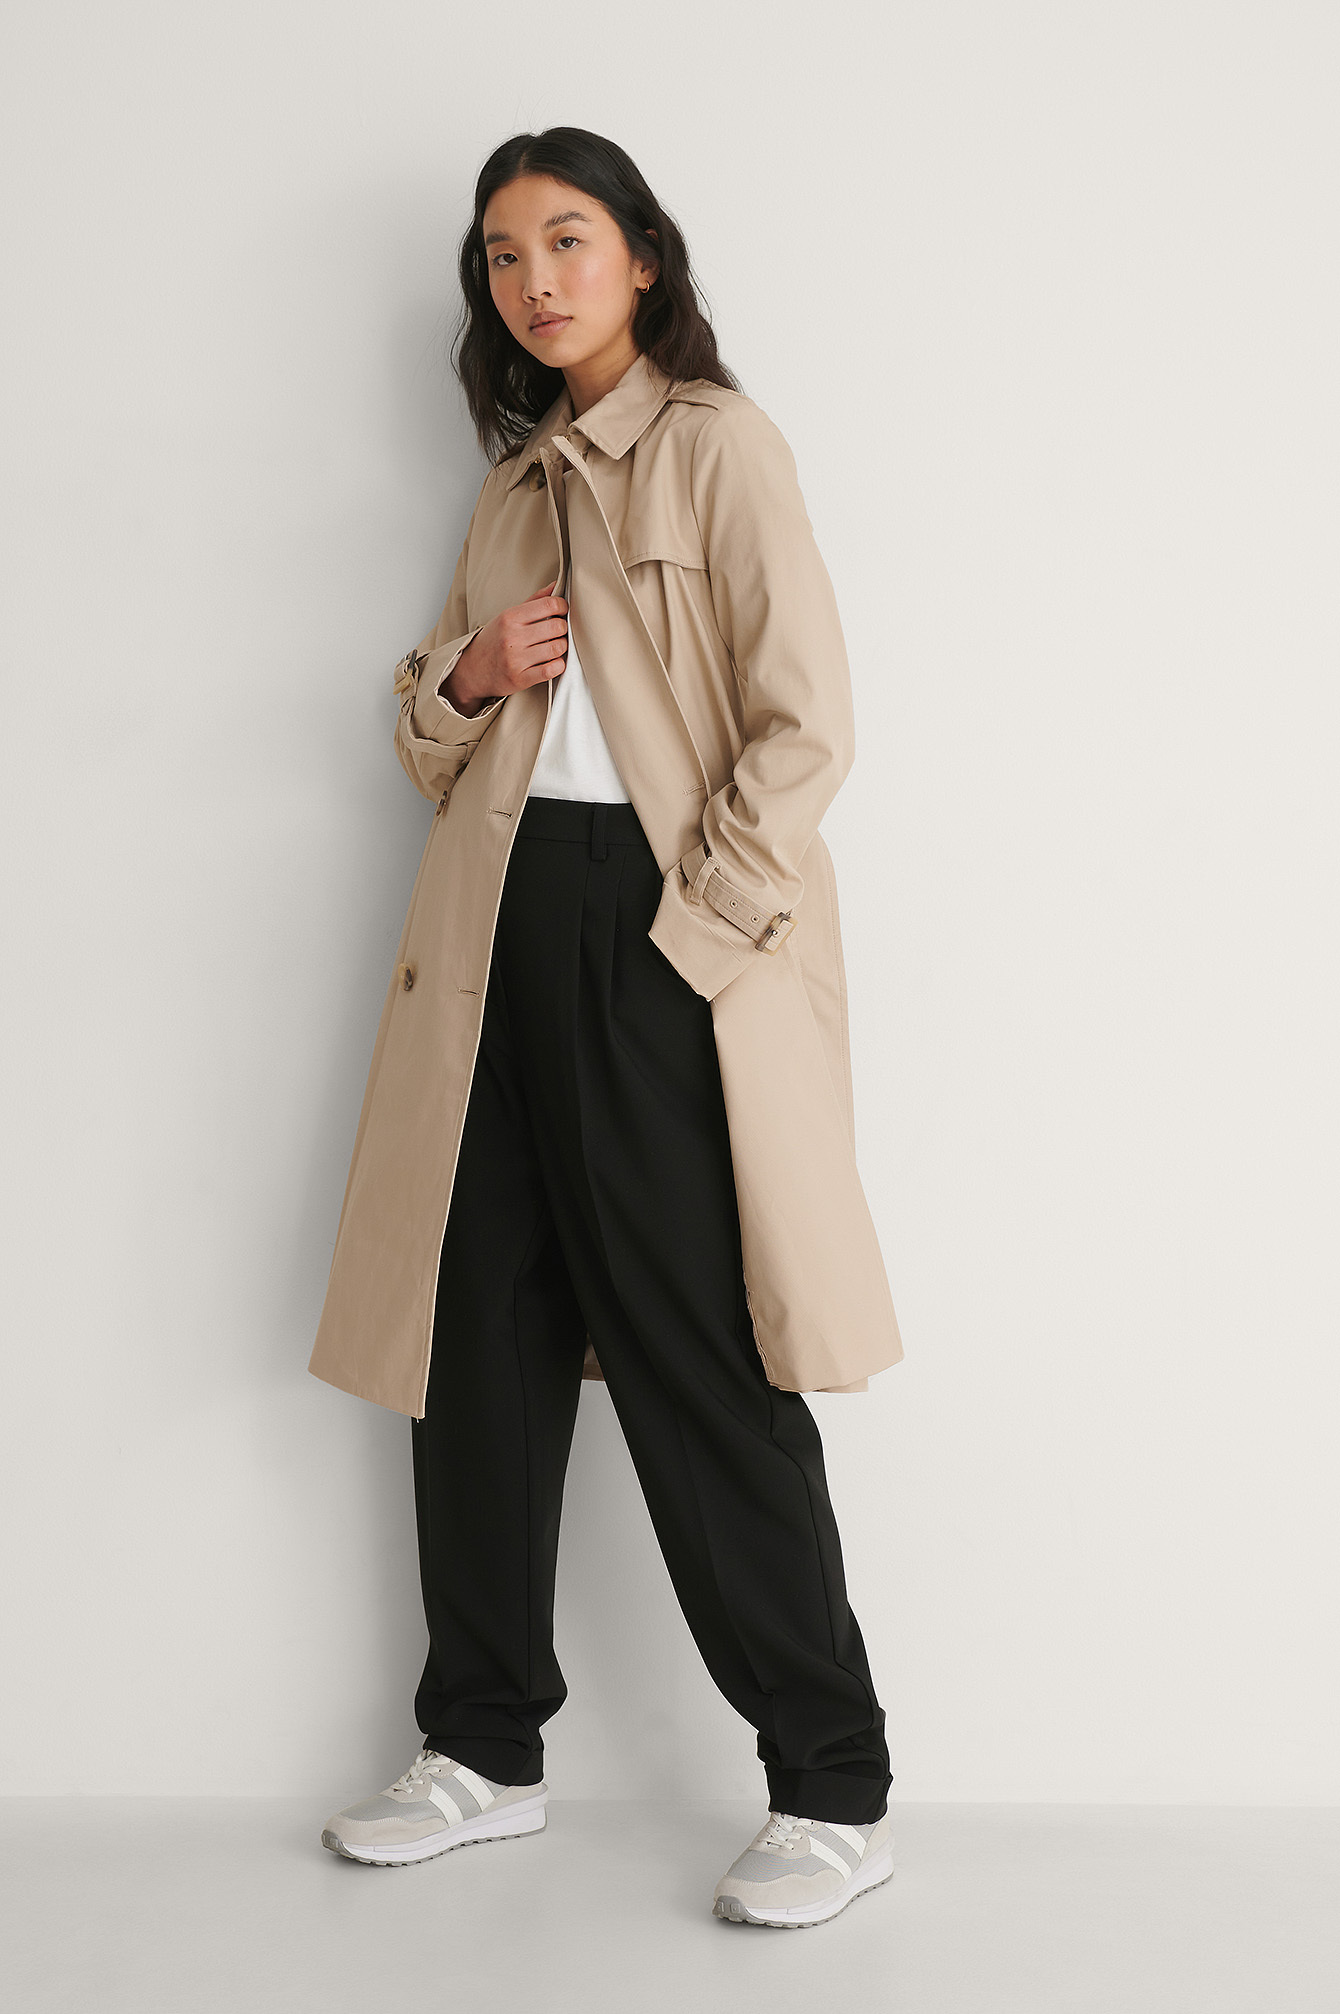 Trench Coat Outfit.